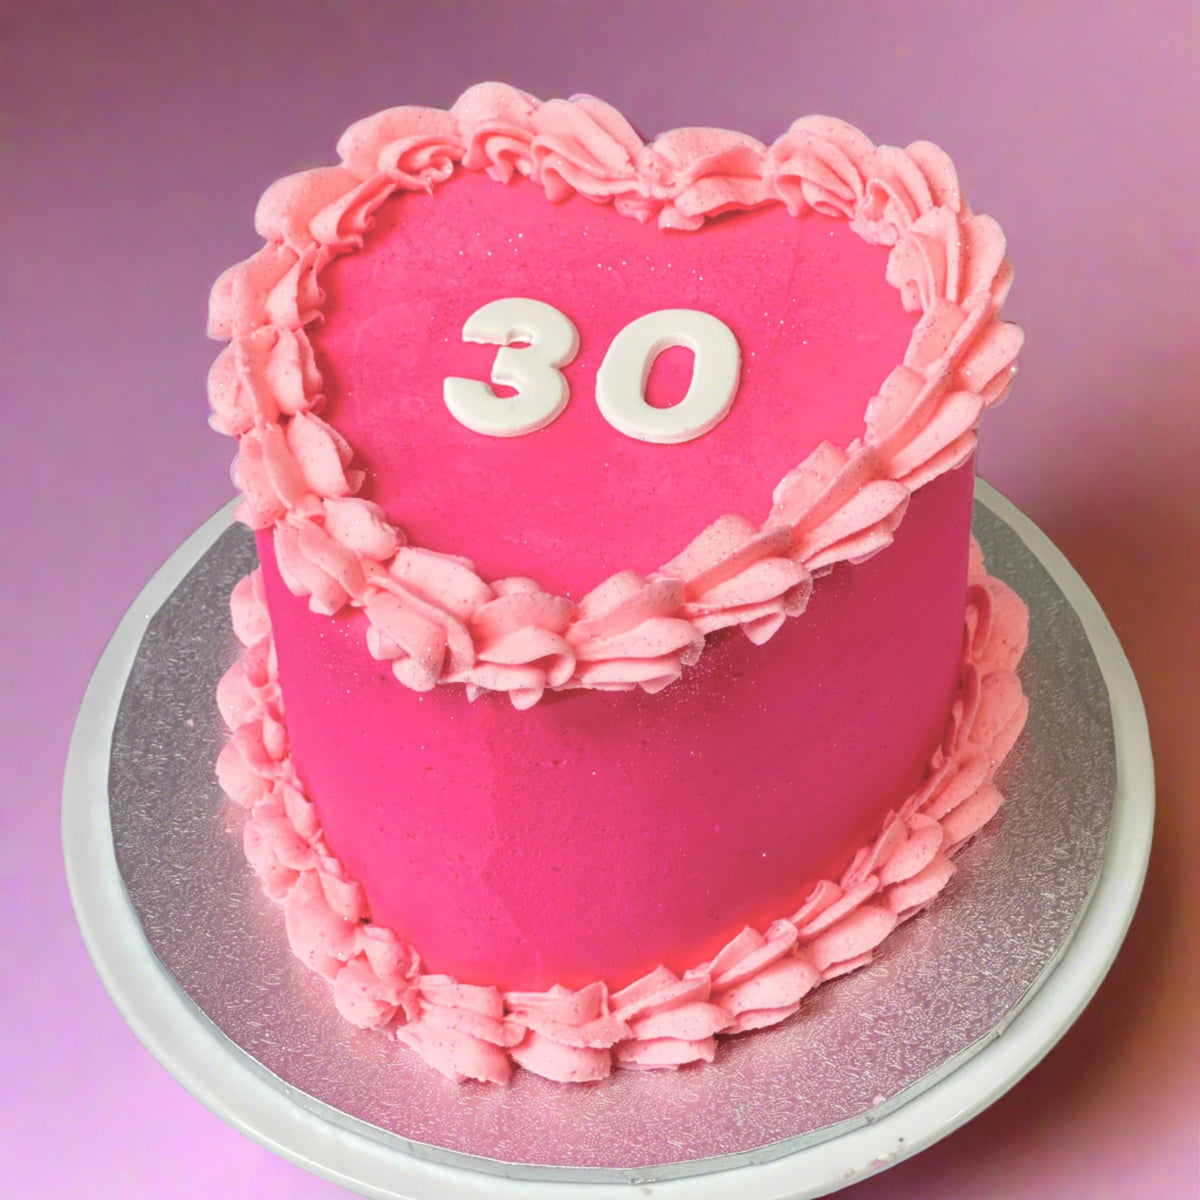 Vintage Heart Cake - Hot Pink The Cupcake Queens 